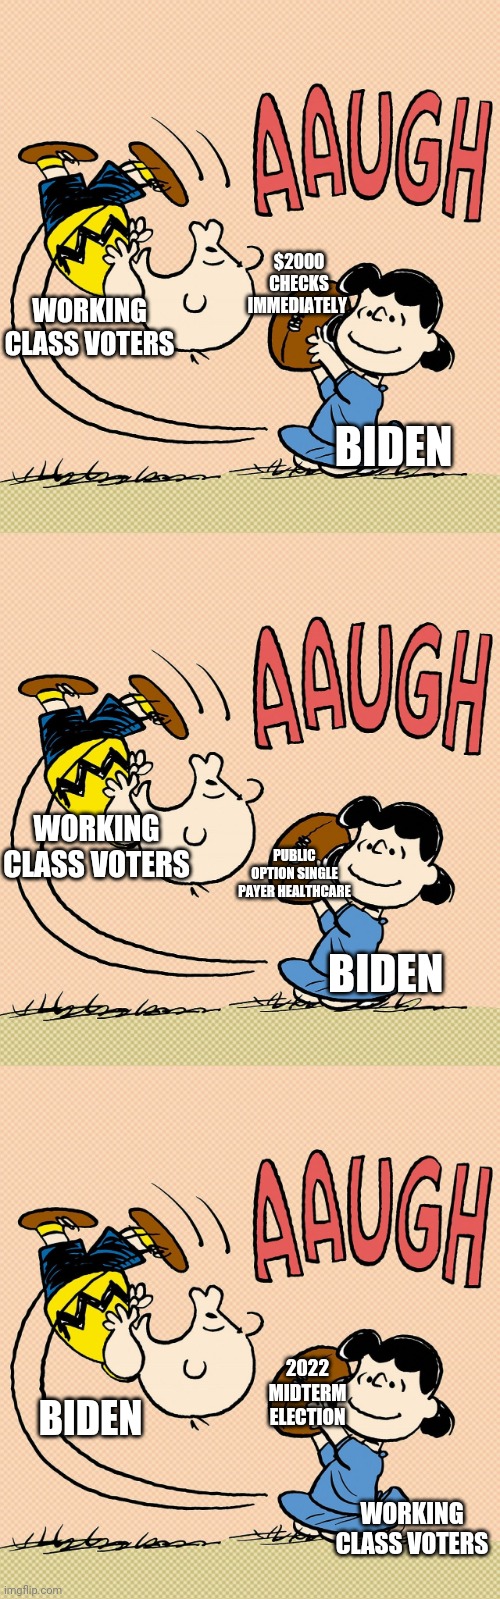 Democrats never learn | $2000 CHECKS IMMEDIATELY; WORKING CLASS VOTERS; BIDEN; WORKING CLASS VOTERS; PUBLIC OPTION SINGLE PAYER HEALTHCARE; BIDEN; 2022 MIDTERM ELECTION; BIDEN; WORKING CLASS VOTERS | image tagged in democrats,lucy,charlie brown,2022,election | made w/ Imgflip meme maker